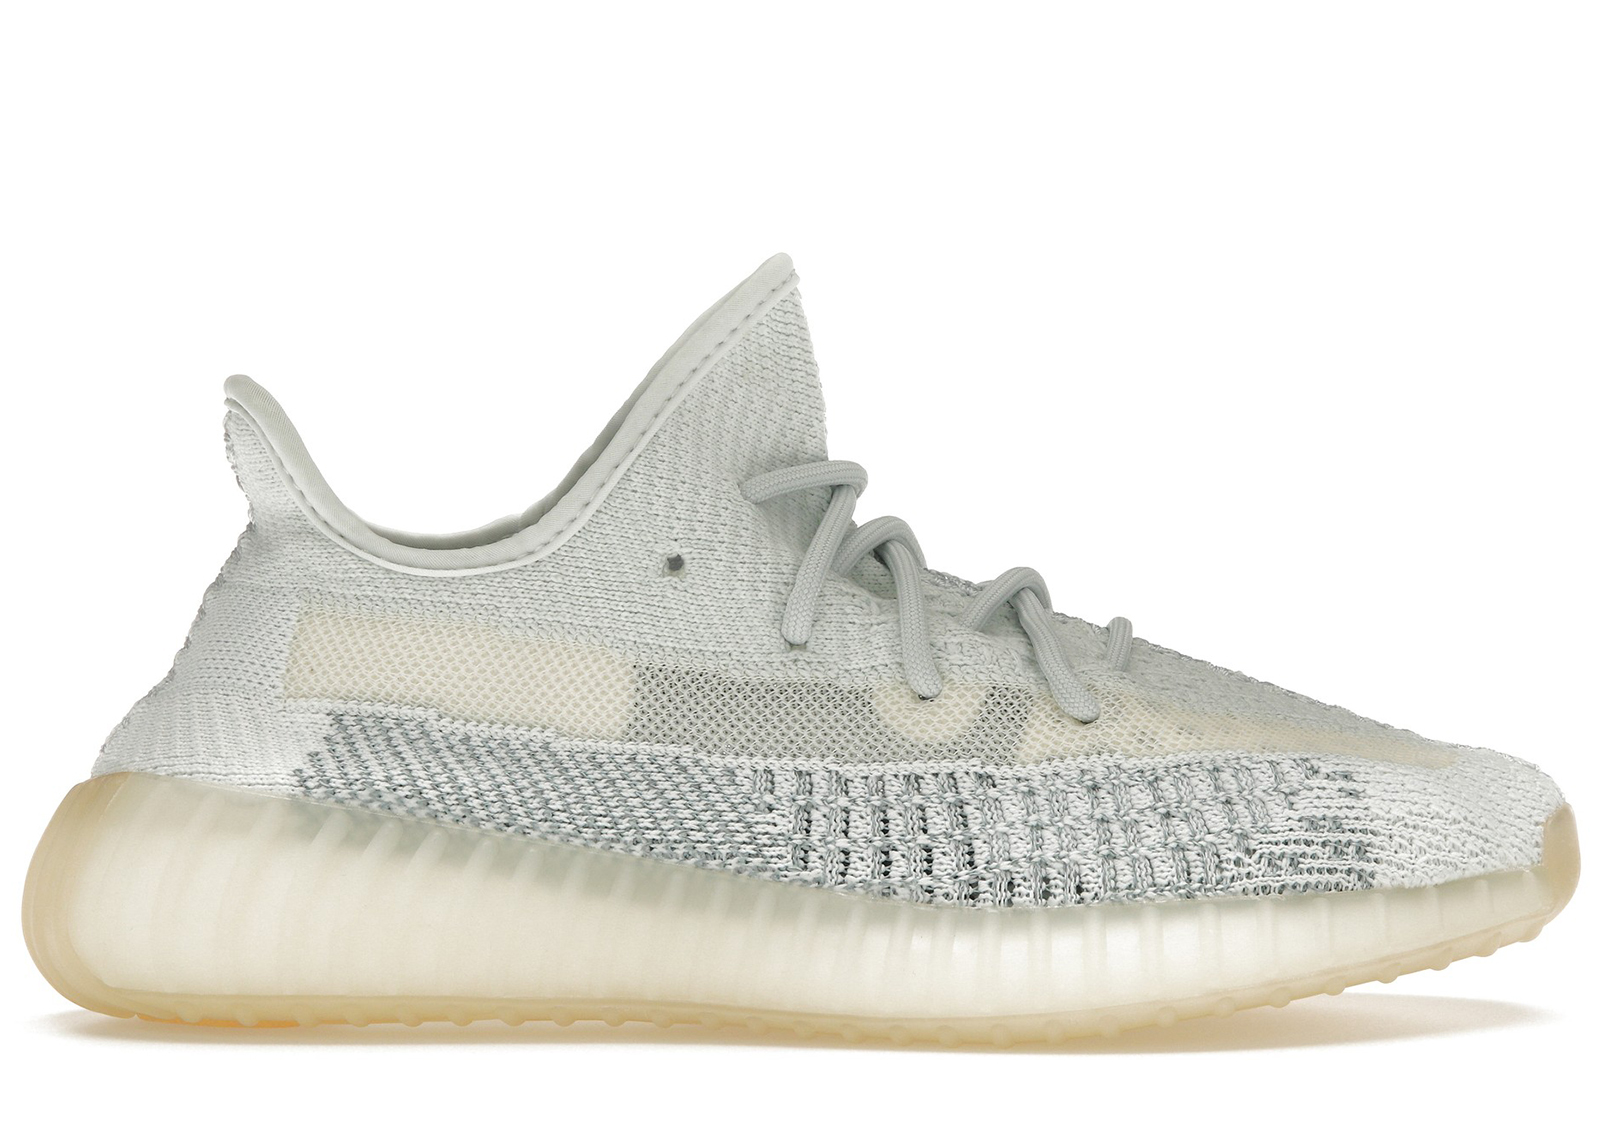 adidas Yeezy Boost 350 V2 Synth (Reflective) Men's - FV5666 - US